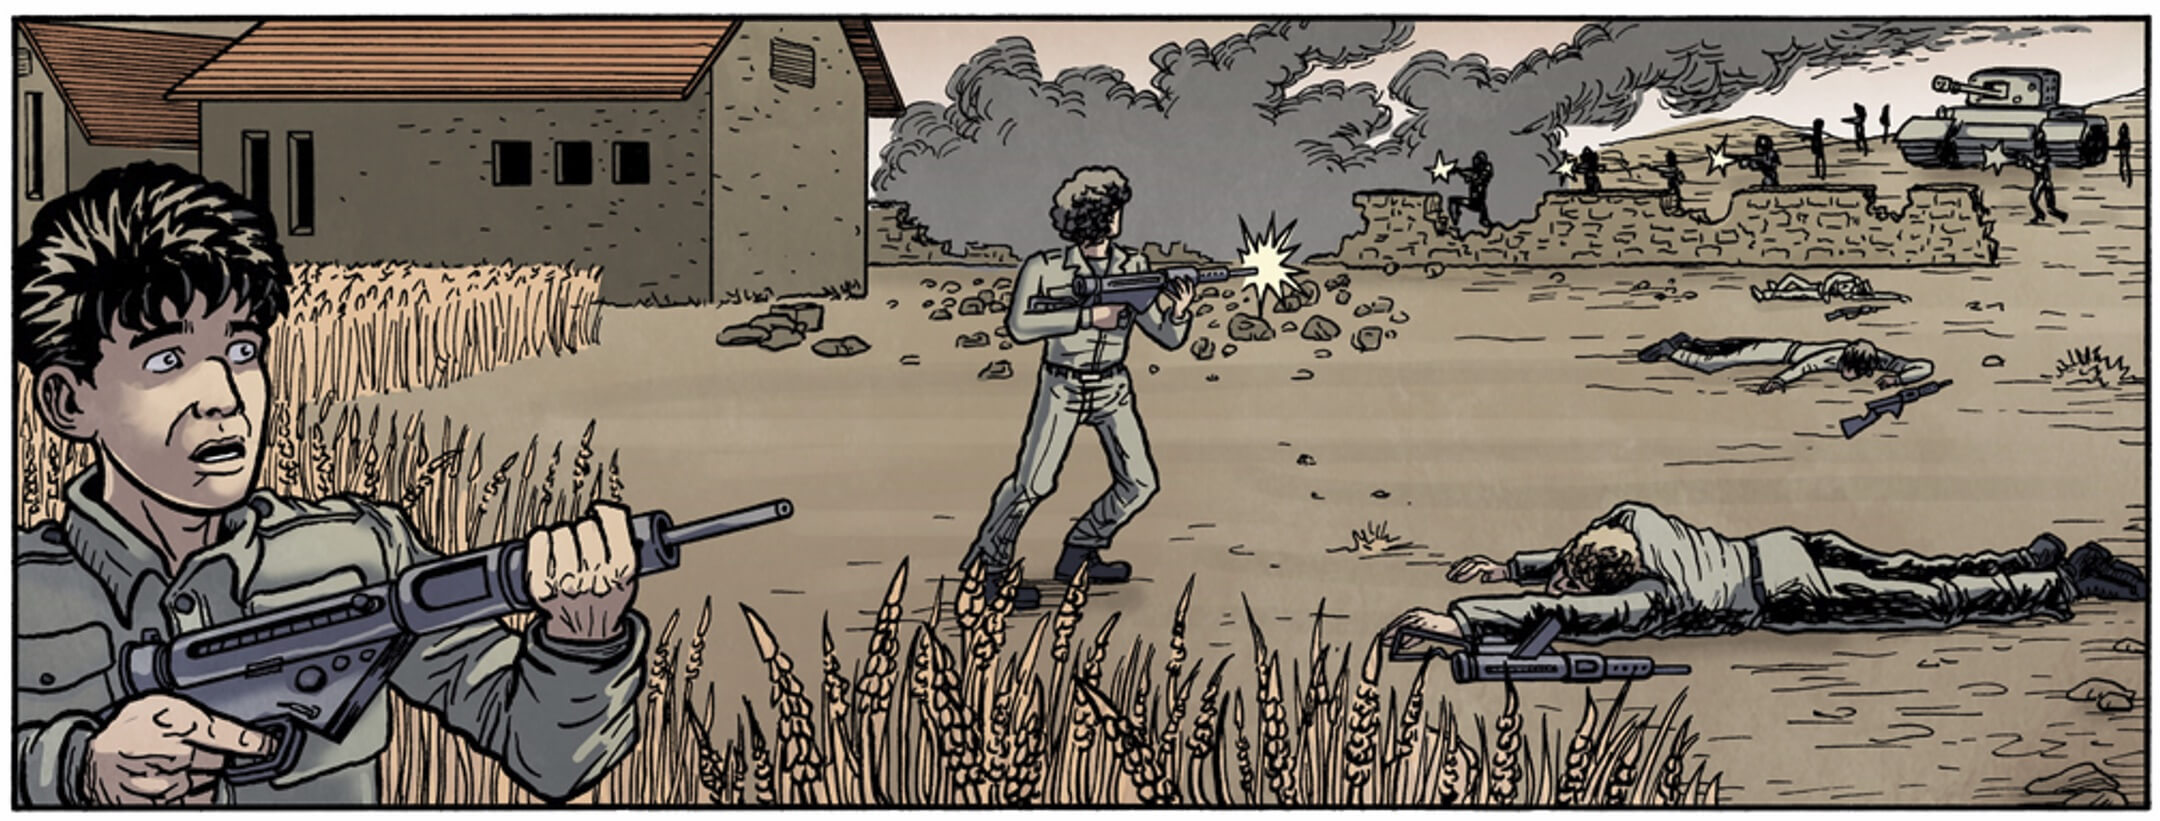 <i>Brothers Keeper</i> by Arnon Shorr and Joshua Edelglass was conceived as a short comic book about the time Shorr’s grandfather was wounded defending a kibbutz in 1948.